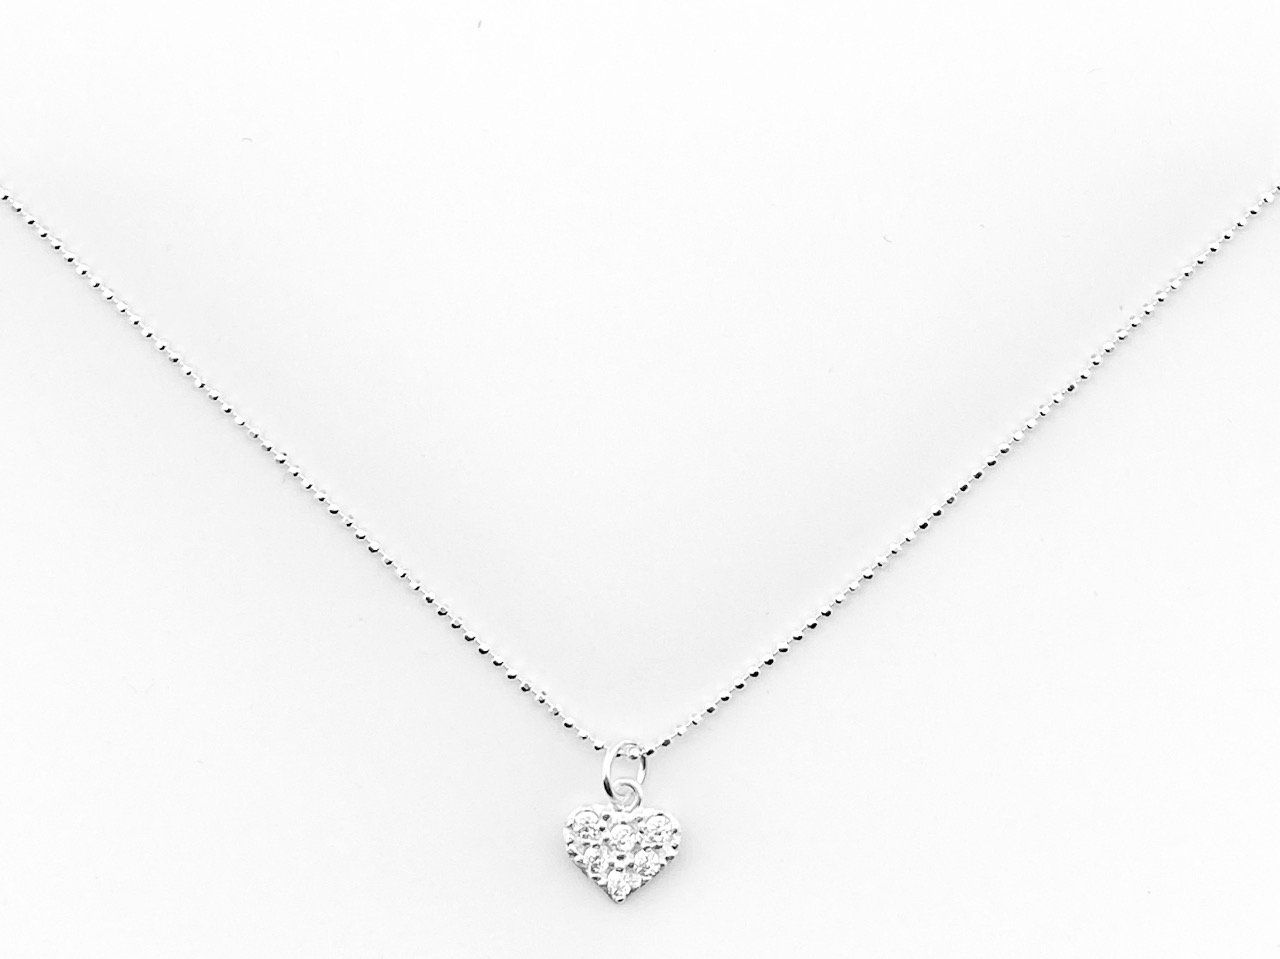  COLLIER COEUR PAVE